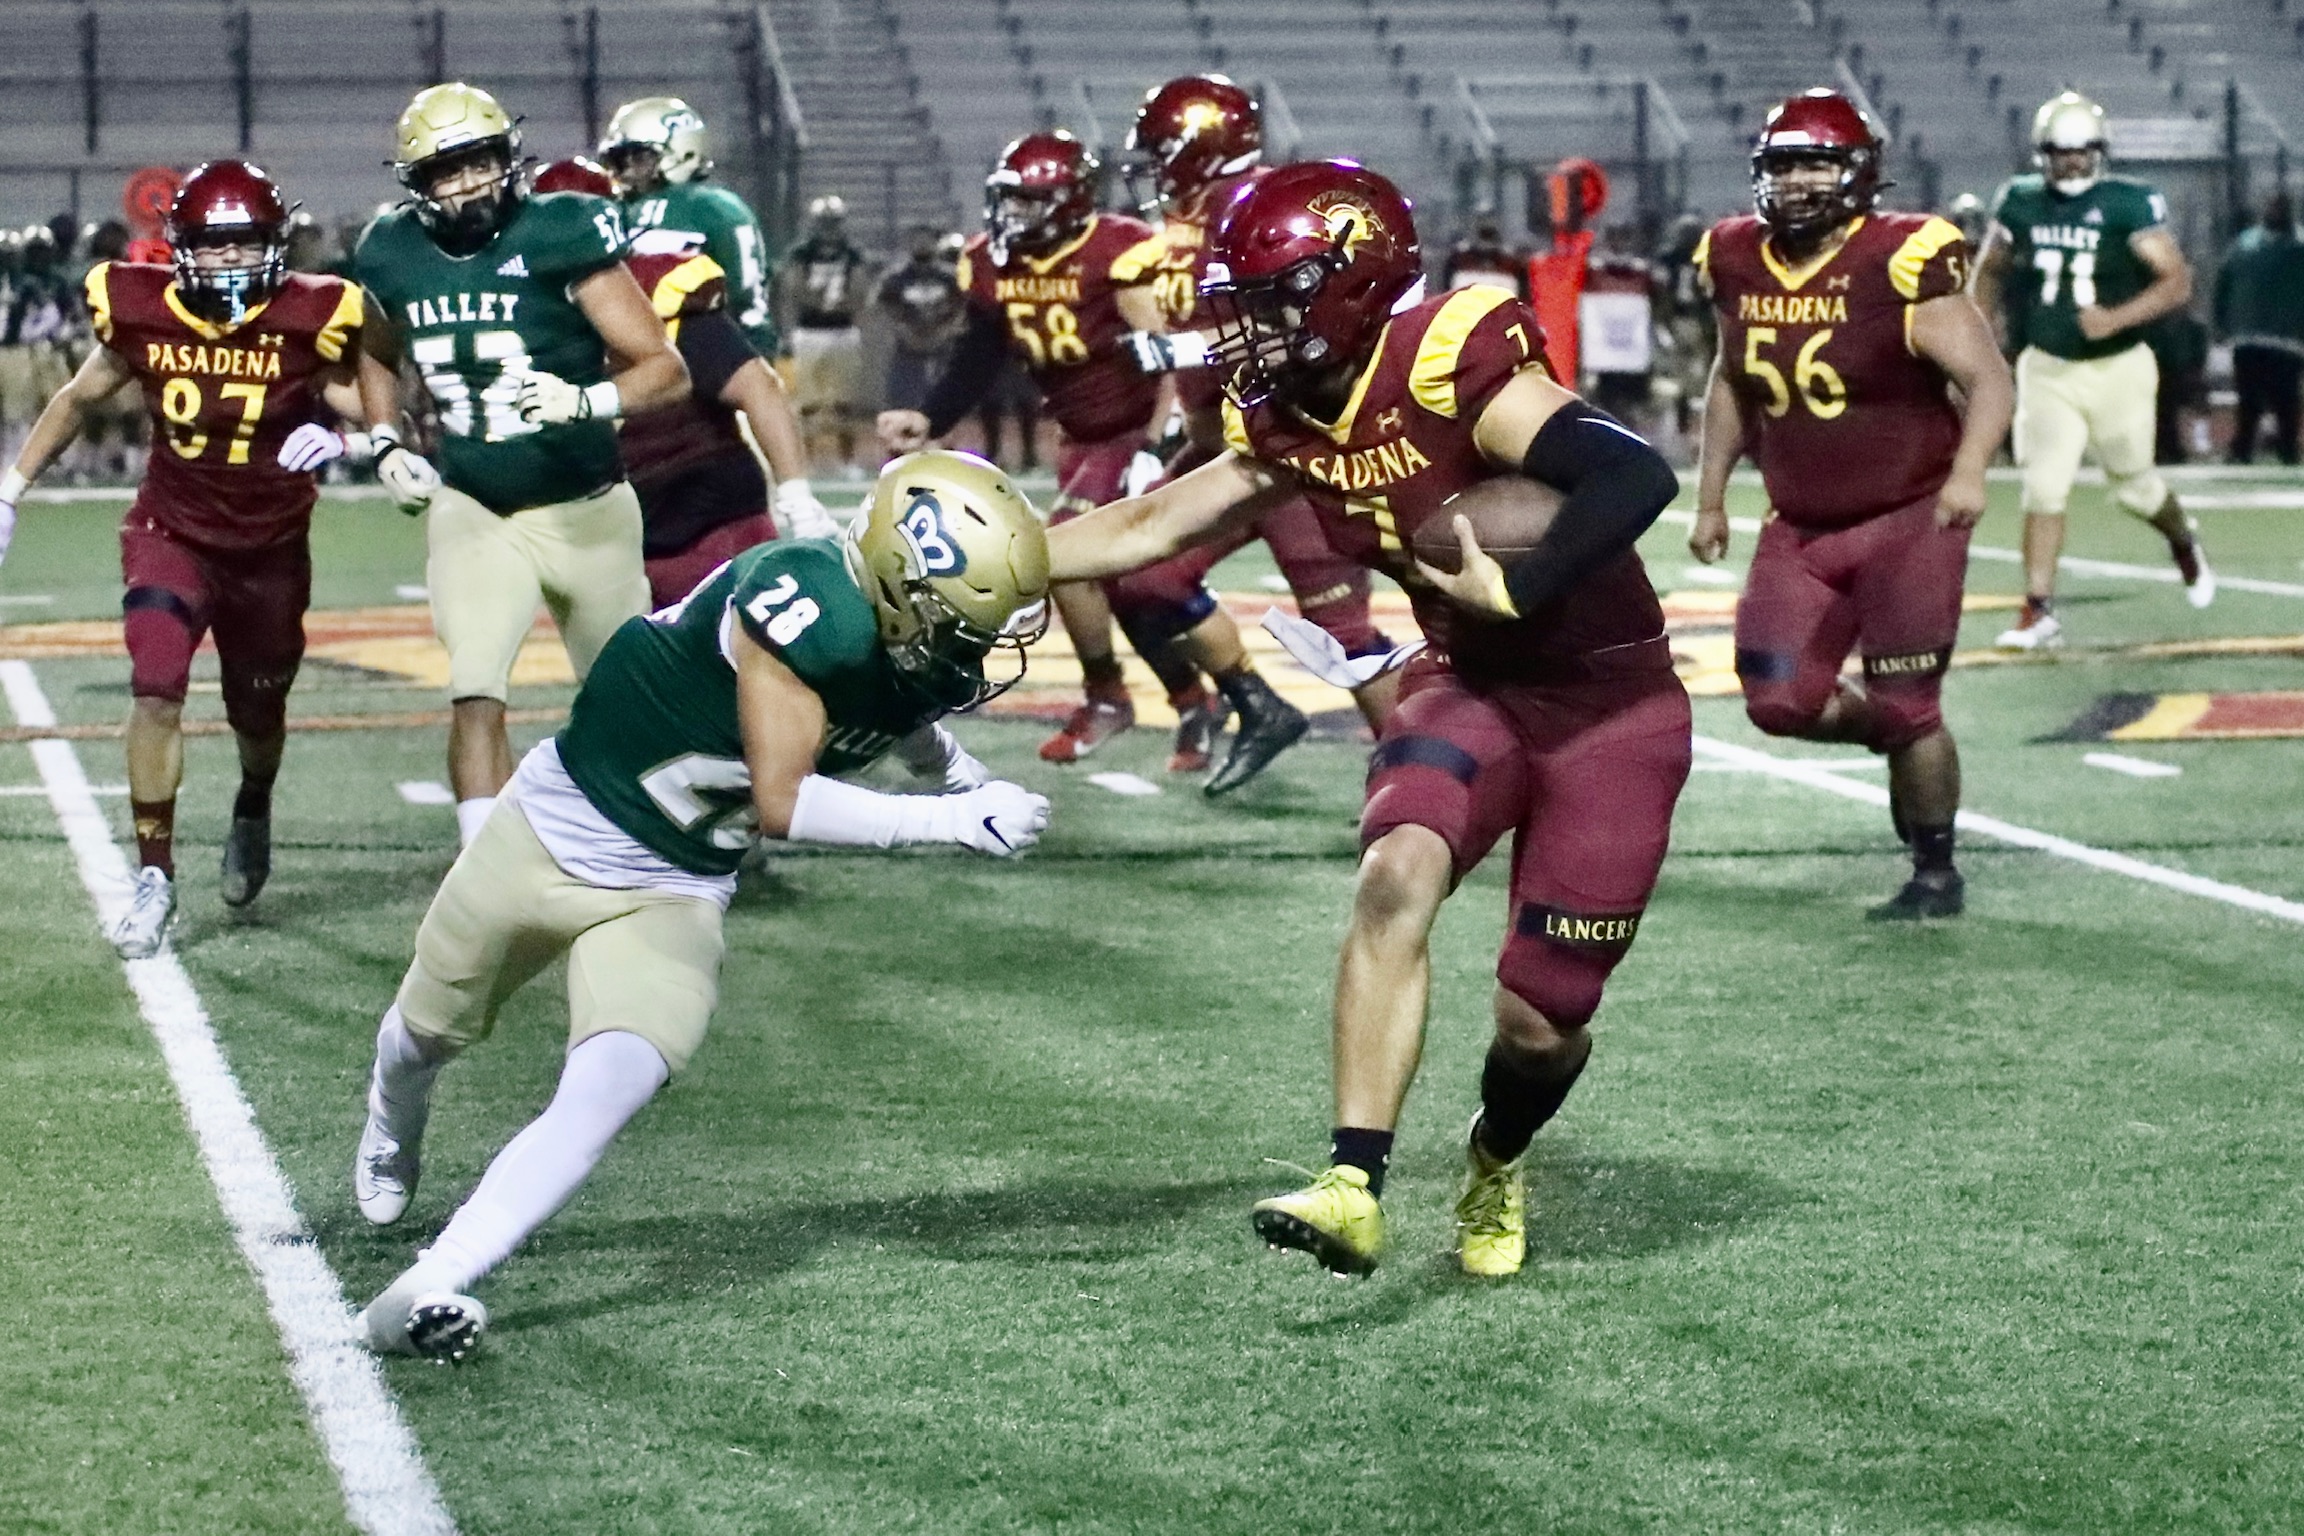 Kade Wentz had 297 yards total offense and passed four touchdowns and ran for another in Saturday's win over LA Valley (photo by Michael Watkins).